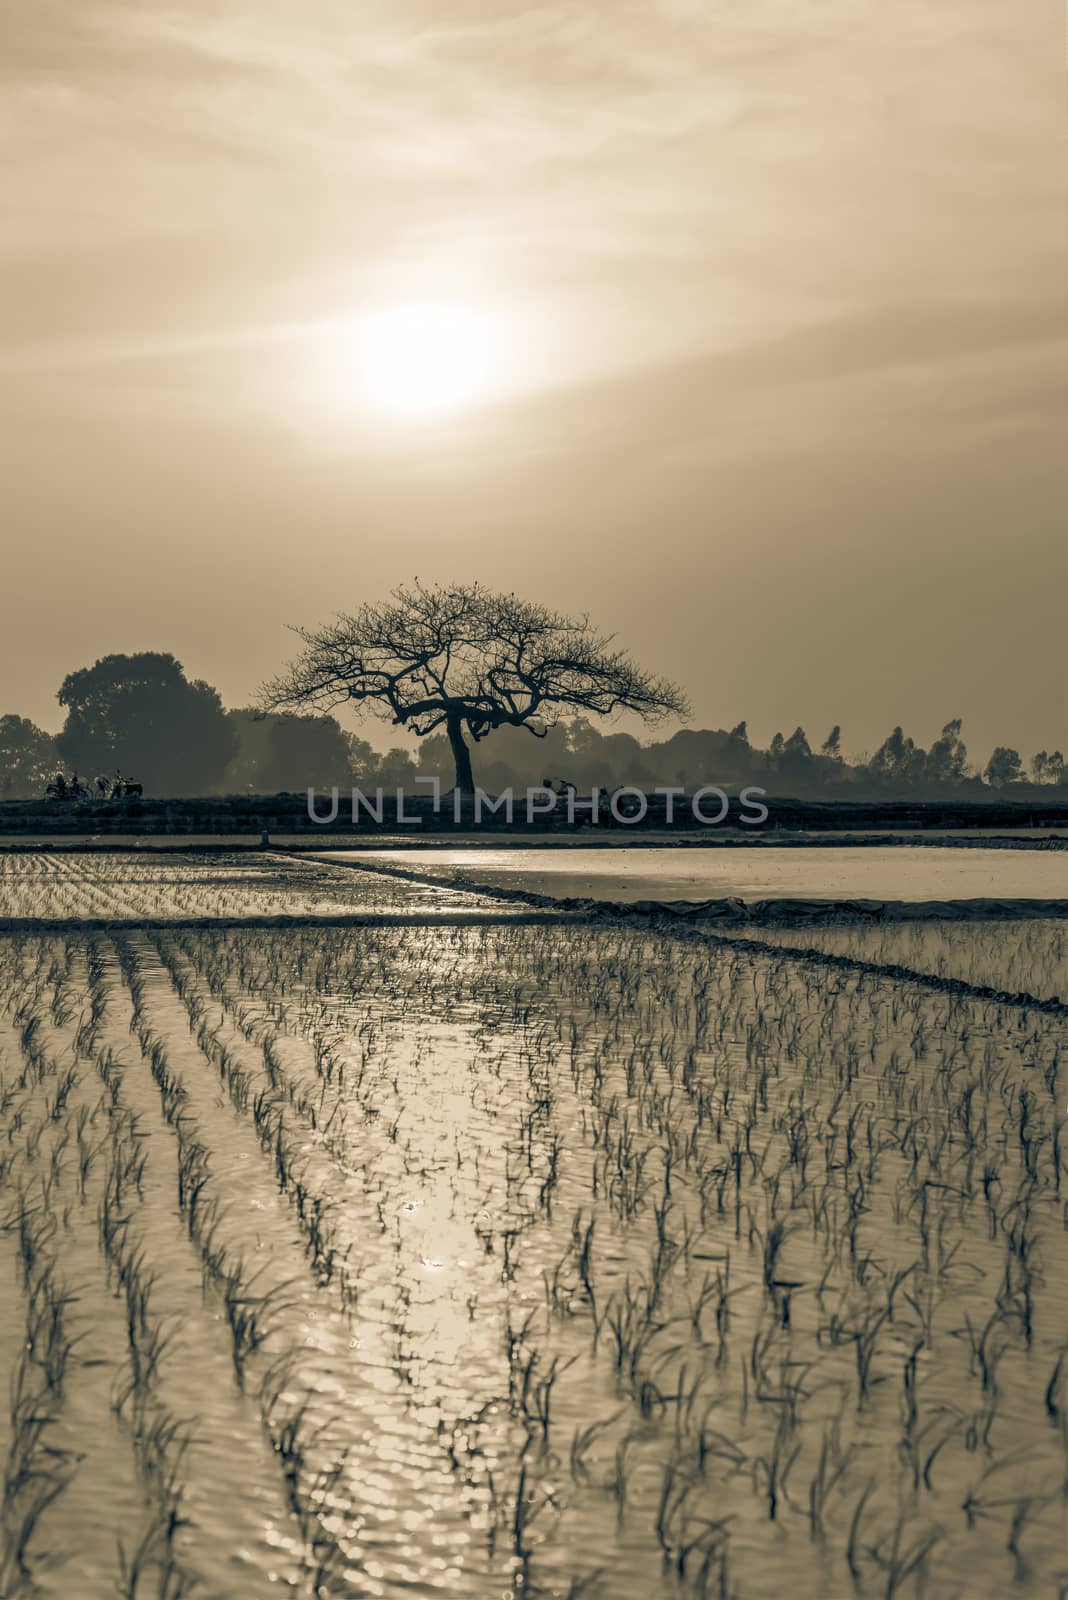 Filtered image freshly transplanted rice plants on water surface patches growing at sunset near Hanoi by trongnguyen